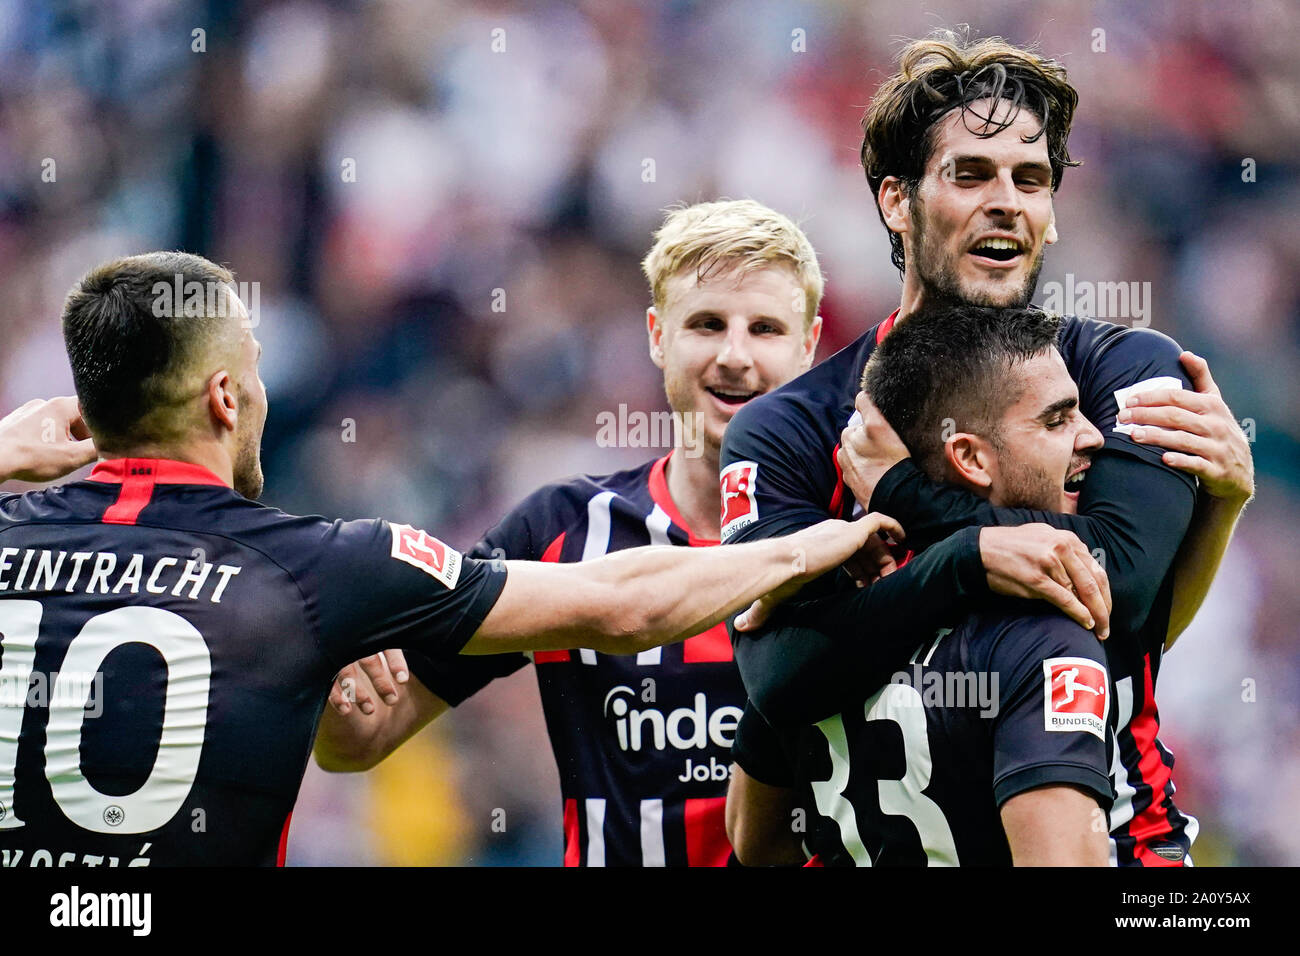 22 September 2019, Hessen, Frankfurt/Main: Soccer: Bundesliga, Eintracht Frankfurt - Borussia Dortmund, 5th matchday, in the Commerzbank Arena. Frankfurt goal scorer Andre Silva (r) cheers with his team-mates, Filip Kostic, Martin Hinteregger and  Goncalo Paciencia over the gate to 1-1. Photo: Uwe Anspach/dpa - IMPORTANT NOTE: In accordance with the requirements of the DFL Deutsche Fußball Liga or the DFB Deutscher Fußball-Bund, it is prohibited to use or have used photographs taken in the stadium and/or the match in the form of sequence images and/or video-like photo sequences. Stock Photo